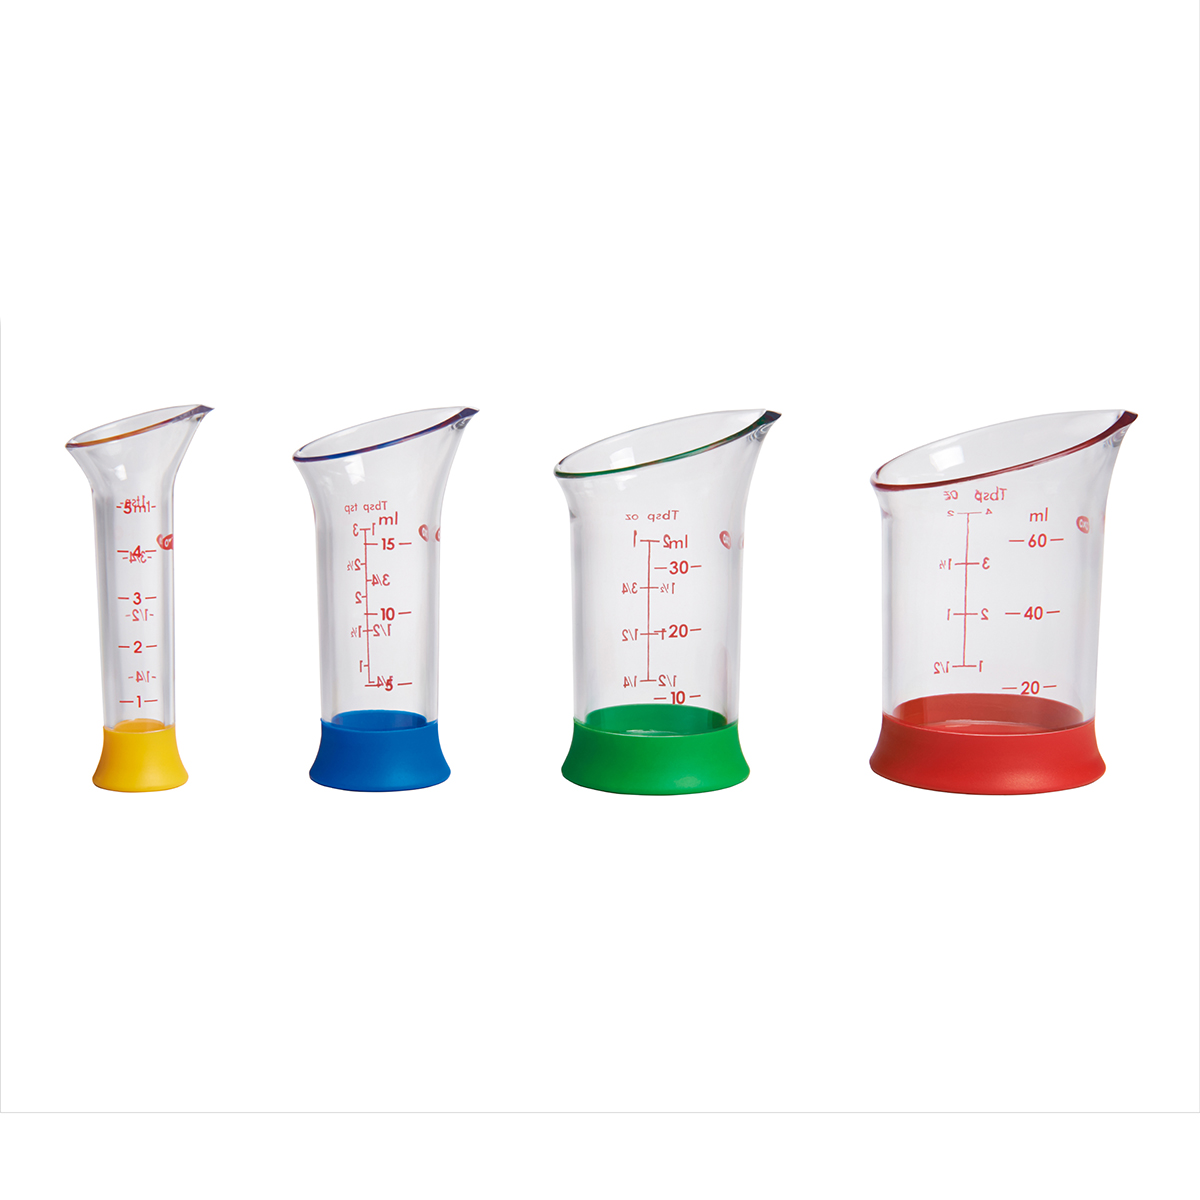 https://www.containerstore.com/catalogimages/426899/10085700-OXO-Beakers-Mini-VEN2.jpg